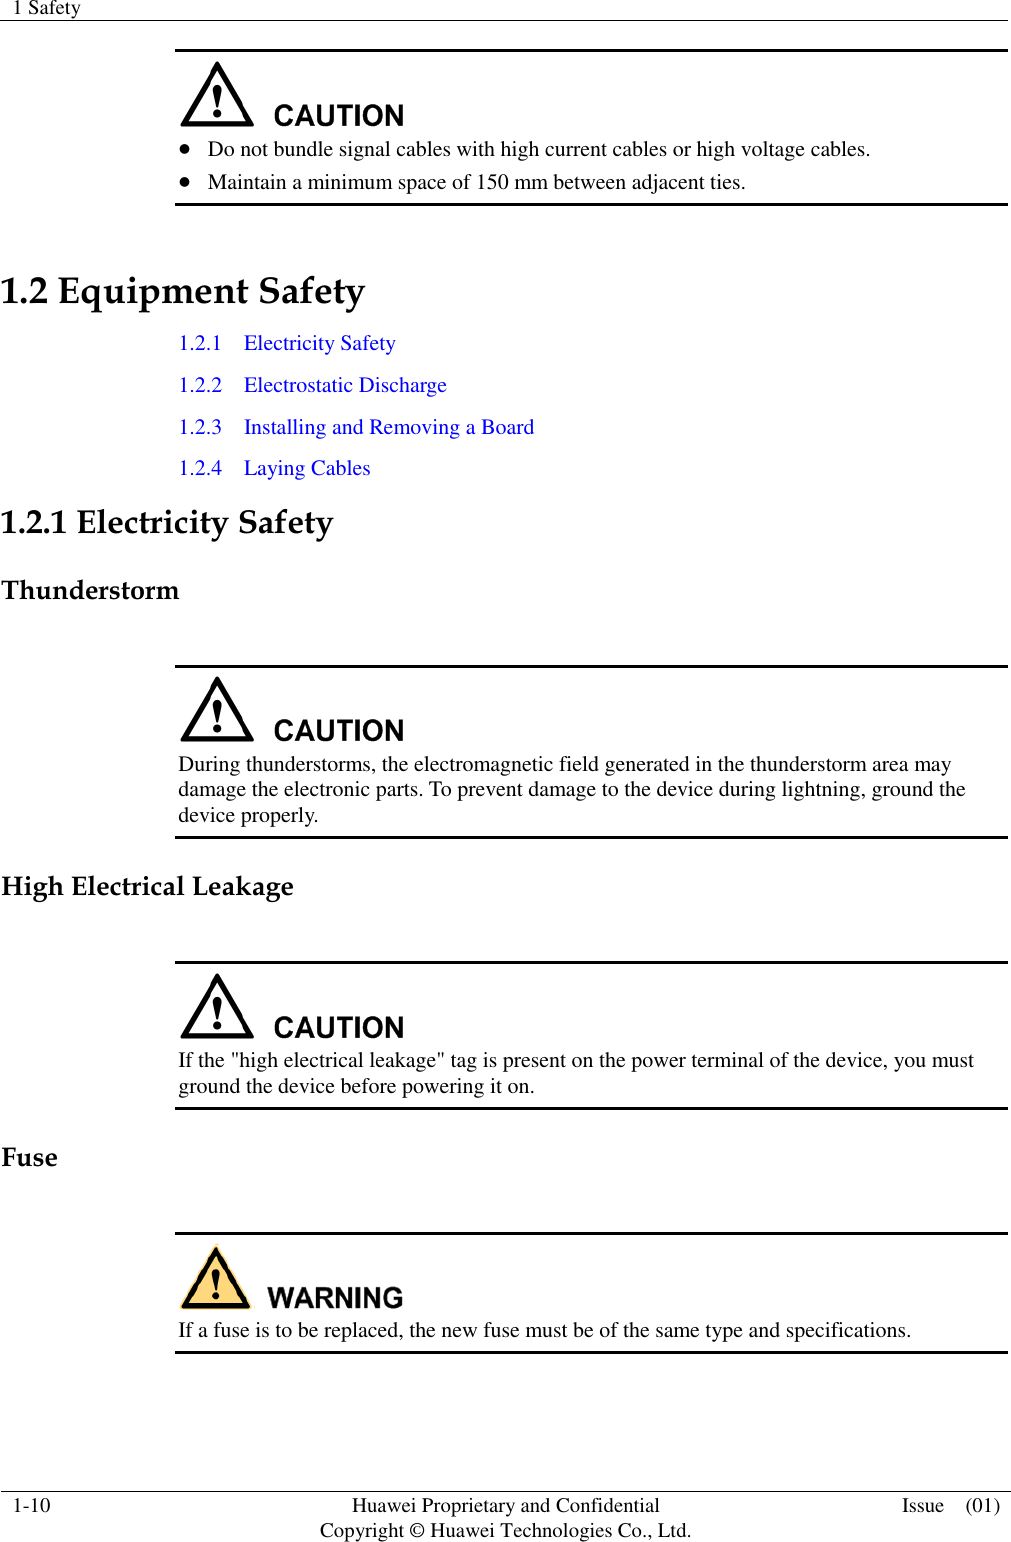 1 Safety    1-10 Huawei Proprietary and Confidential                                     Copyright © Huawei Technologies Co., Ltd. Issue    (01)    Do not bundle signal cables with high current cables or high voltage cables.  Maintain a minimum space of 150 mm between adjacent ties. 1.2 Equipment Safety 1.2.1    Electricity Safety 1.2.2    Electrostatic Discharge 1.2.3    Installing and Removing a Board 1.2.4    Laying Cables 1.2.1 Electricity Safety Thunderstorm   During thunderstorms, the electromagnetic field generated in the thunderstorm area may damage the electronic parts. To prevent damage to the device during lightning, ground the device properly. High Electrical Leakage   If the &quot;high electrical leakage&quot; tag is present on the power terminal of the device, you must ground the device before powering it on. Fuse   If a fuse is to be replaced, the new fuse must be of the same type and specifications.  